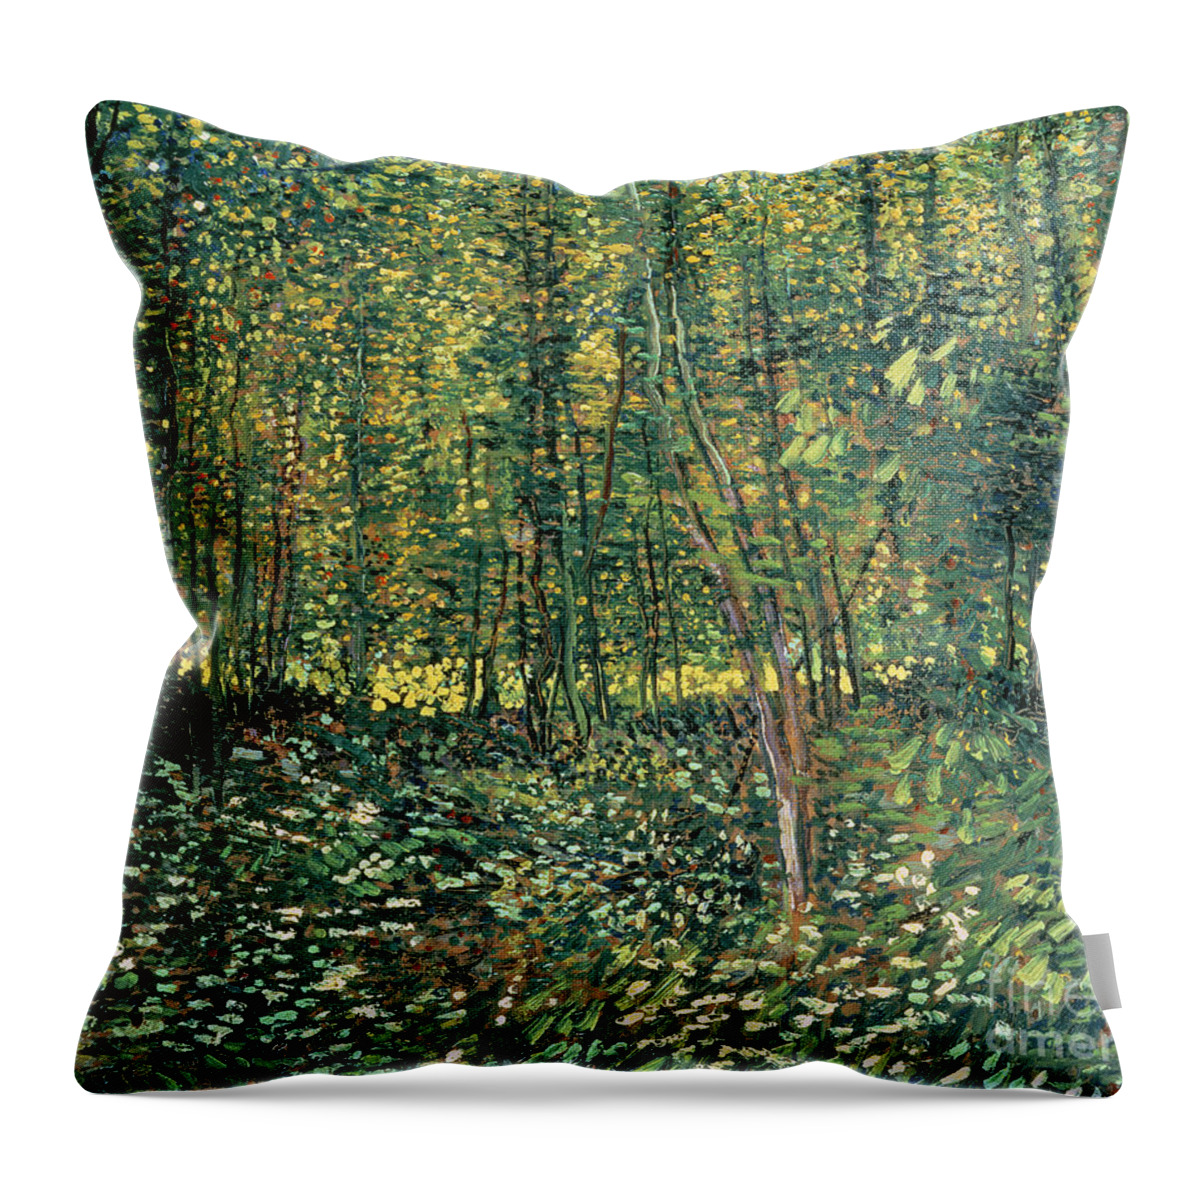 Van Gogh Throw Pillow featuring the painting Trees and Undergrowth by Vincent Van Gogh